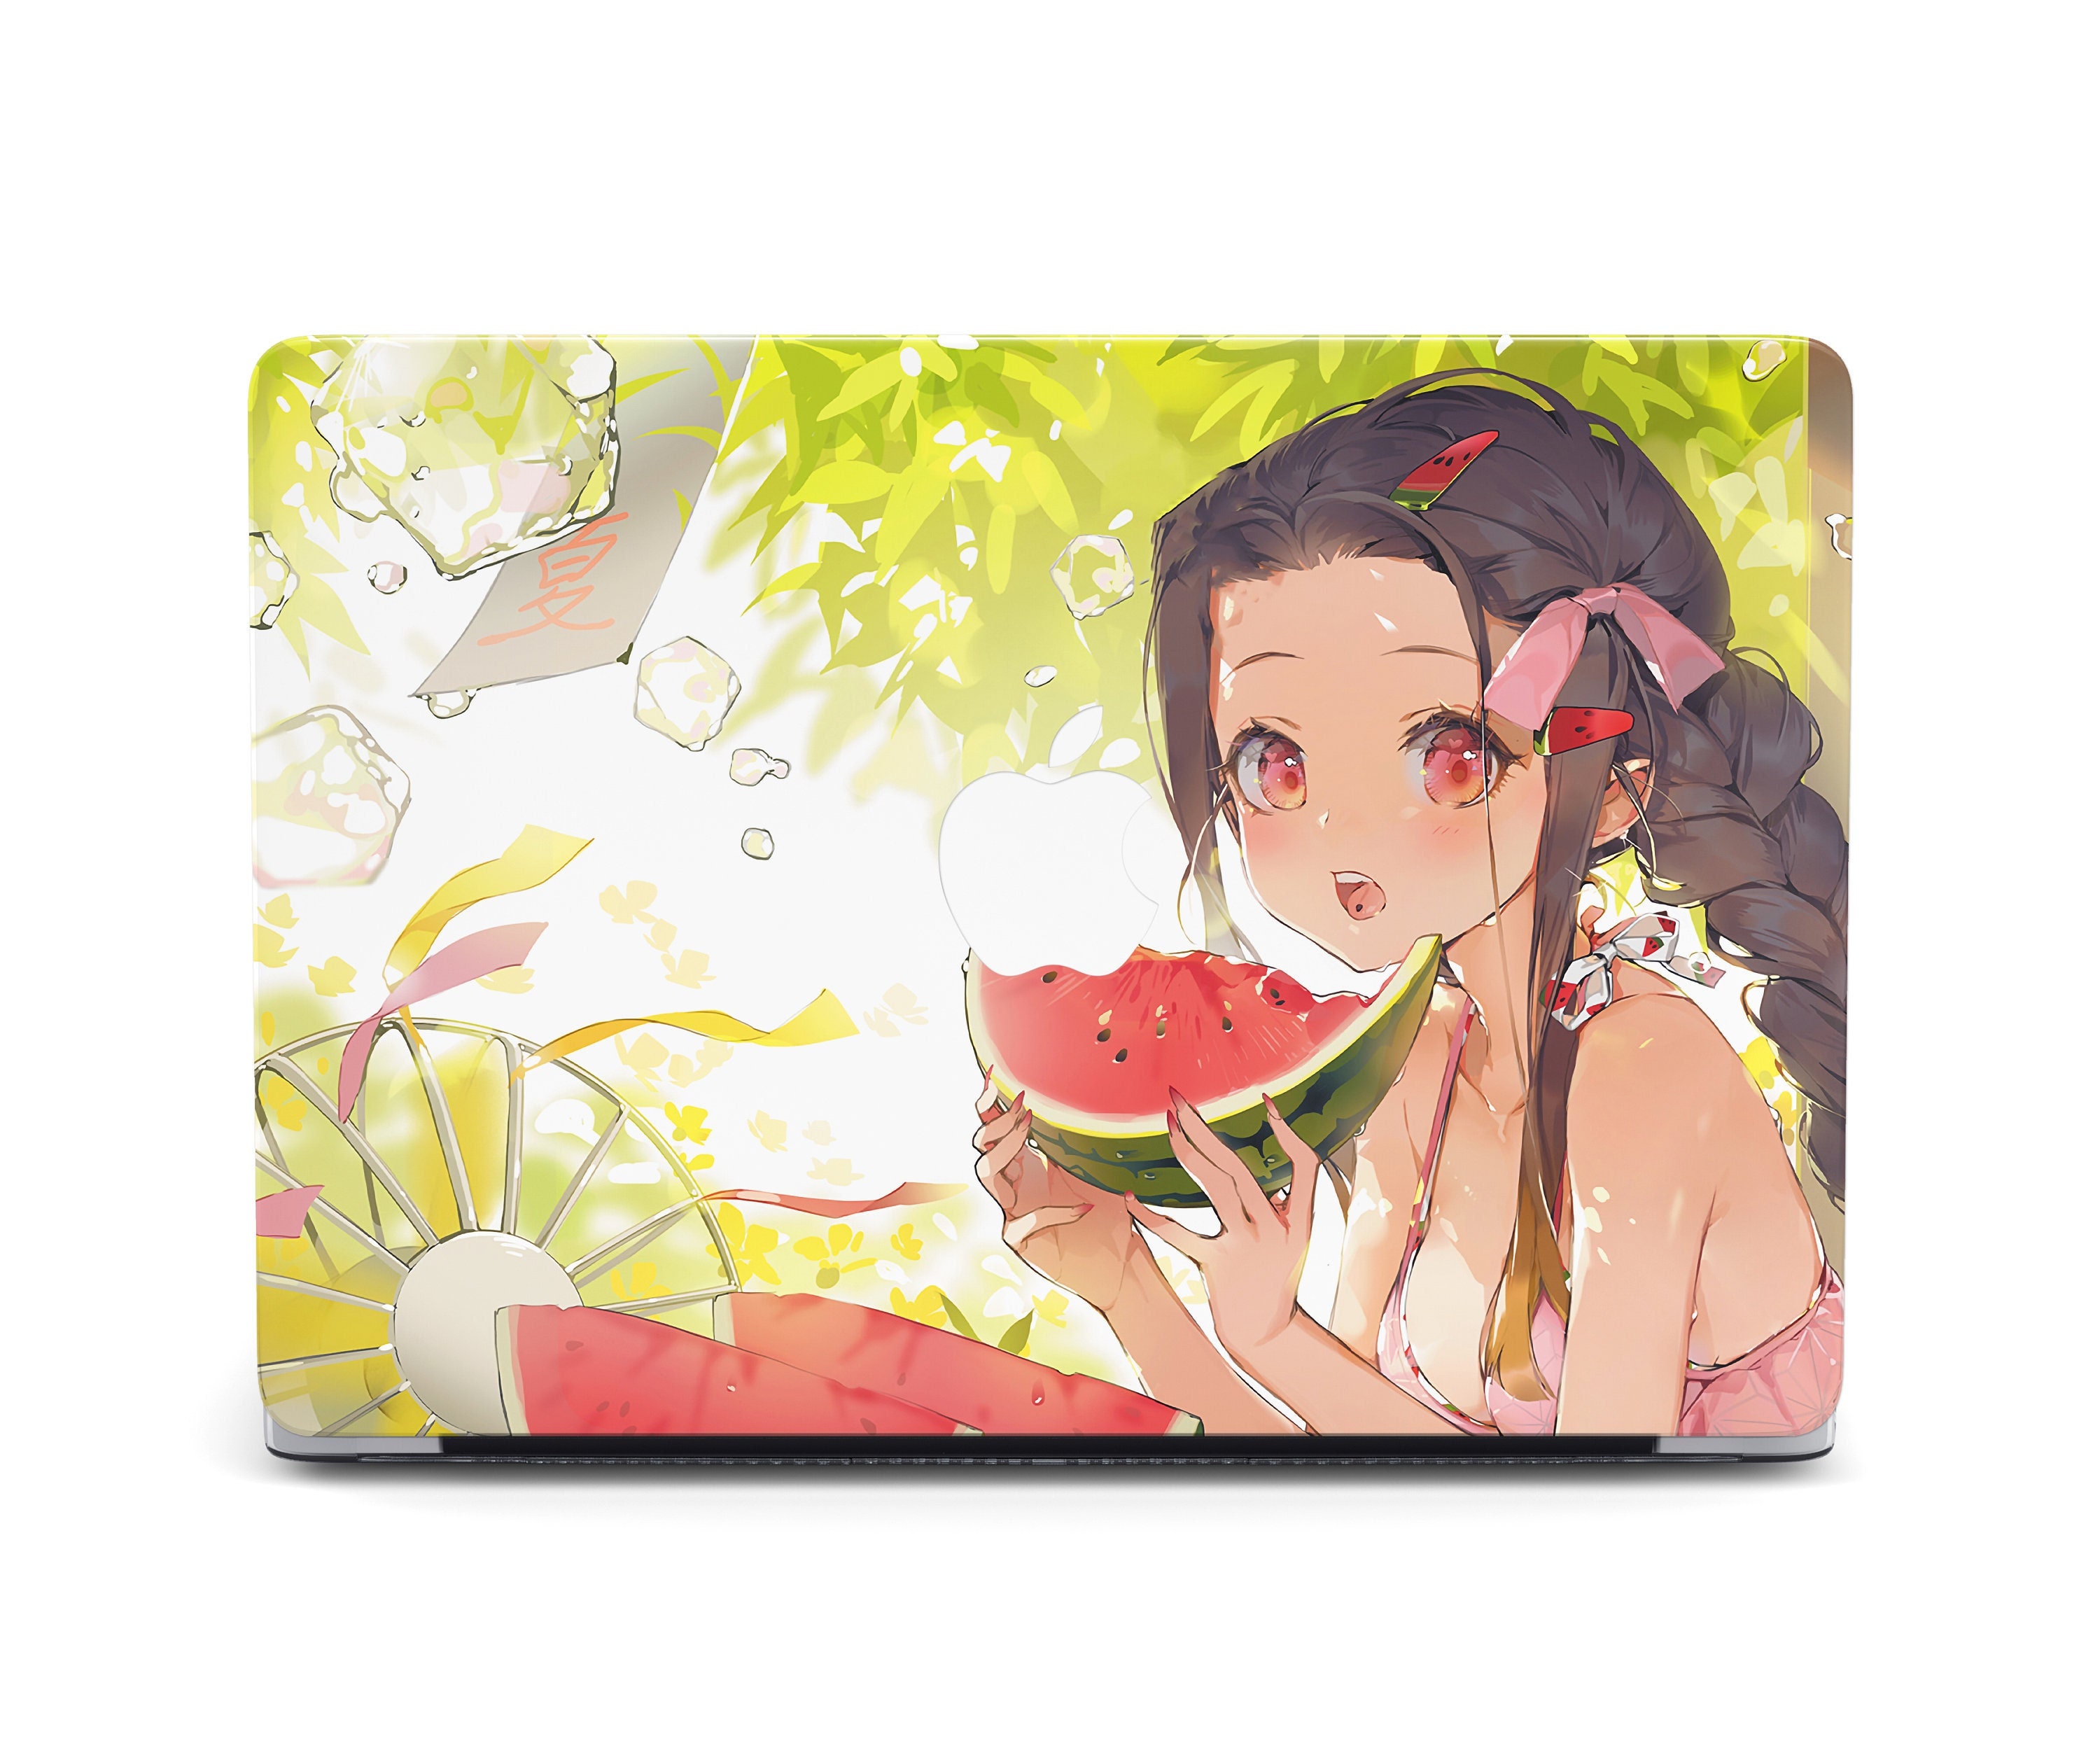 Anime Watermelon Girl Stickers for Sale | Redbubble